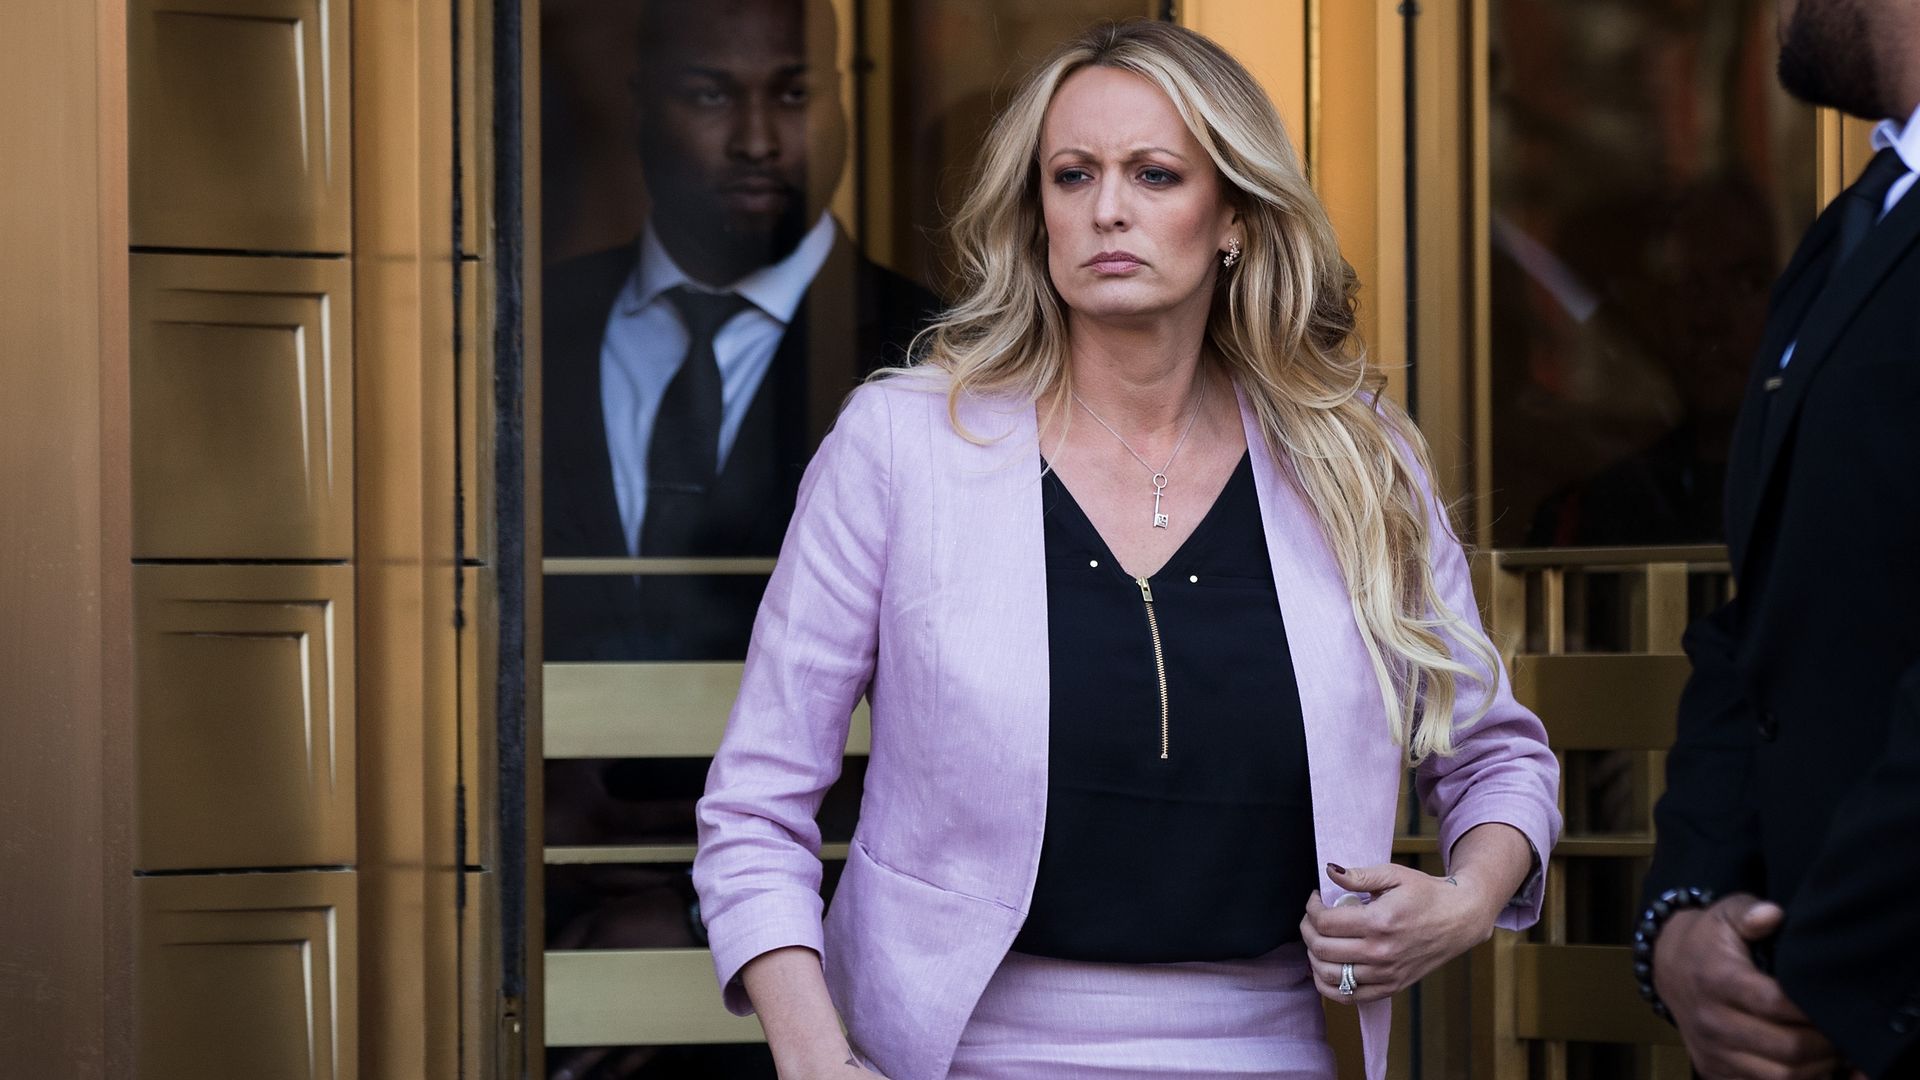 Stormy Daniels exiting court